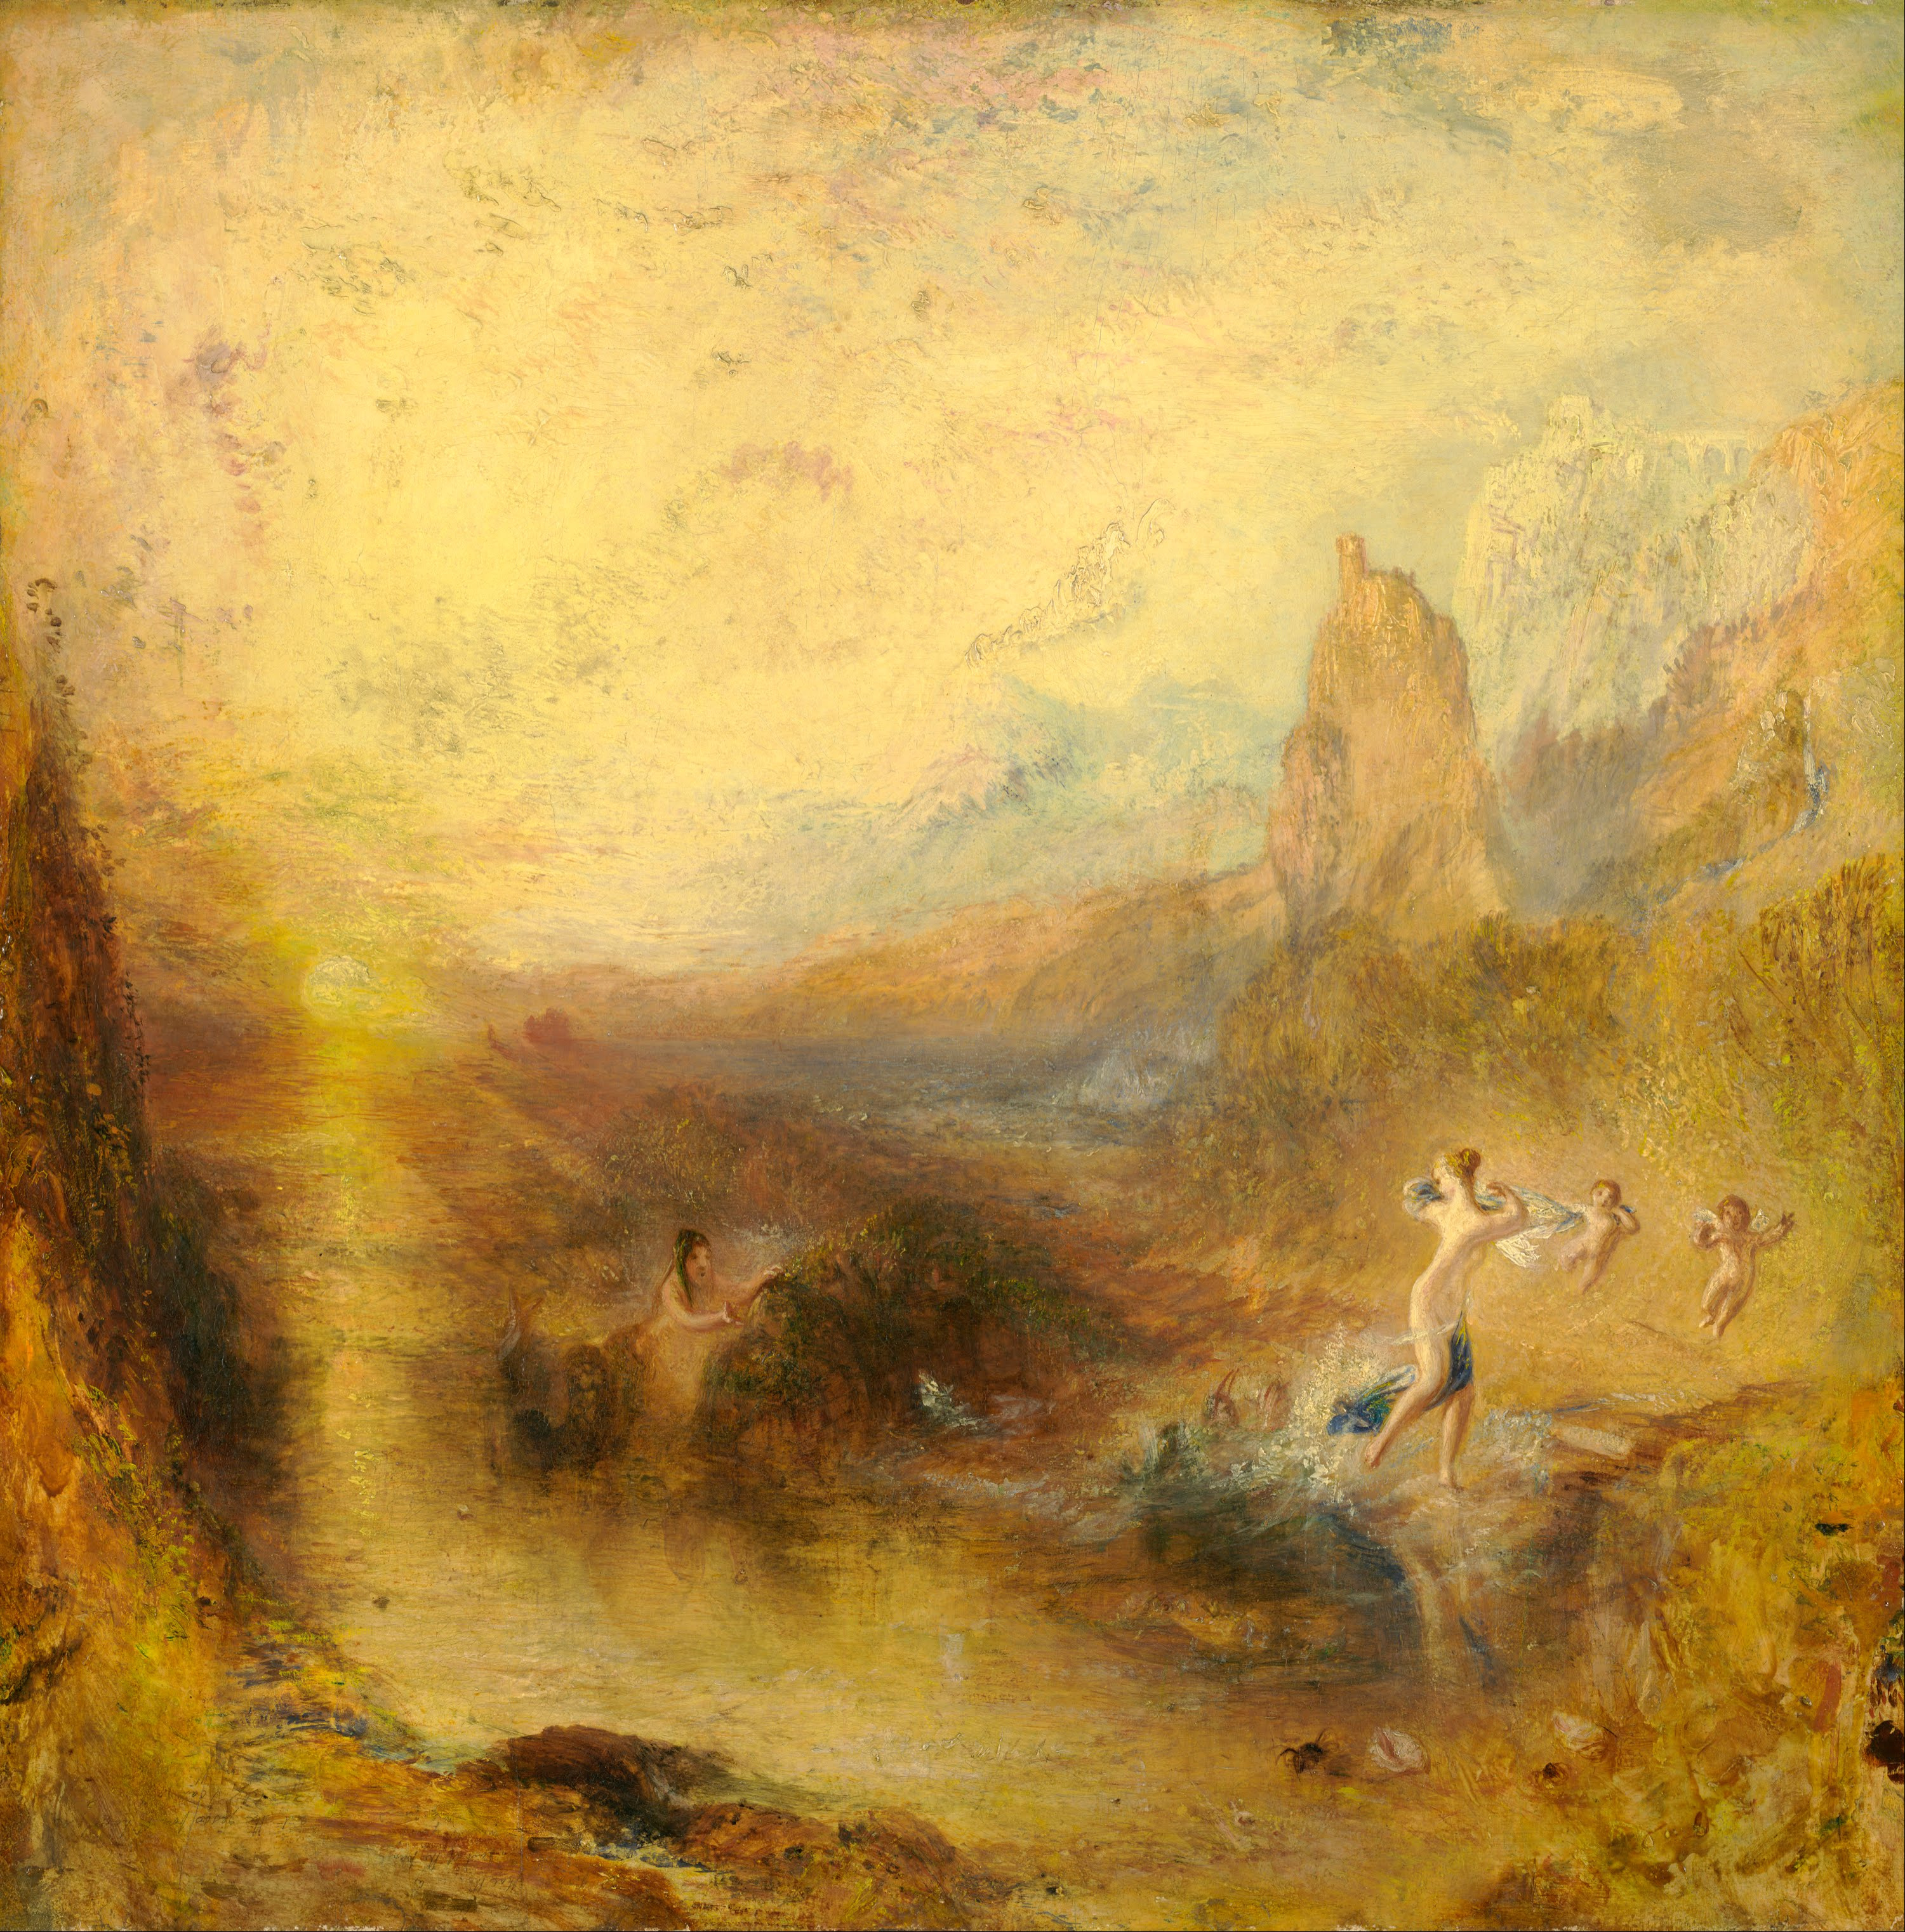 Glaucus and Scylla by Joseph Mallord William Turner - 1841 - 78.3 x 77.5 cm Kimbell Art Museum